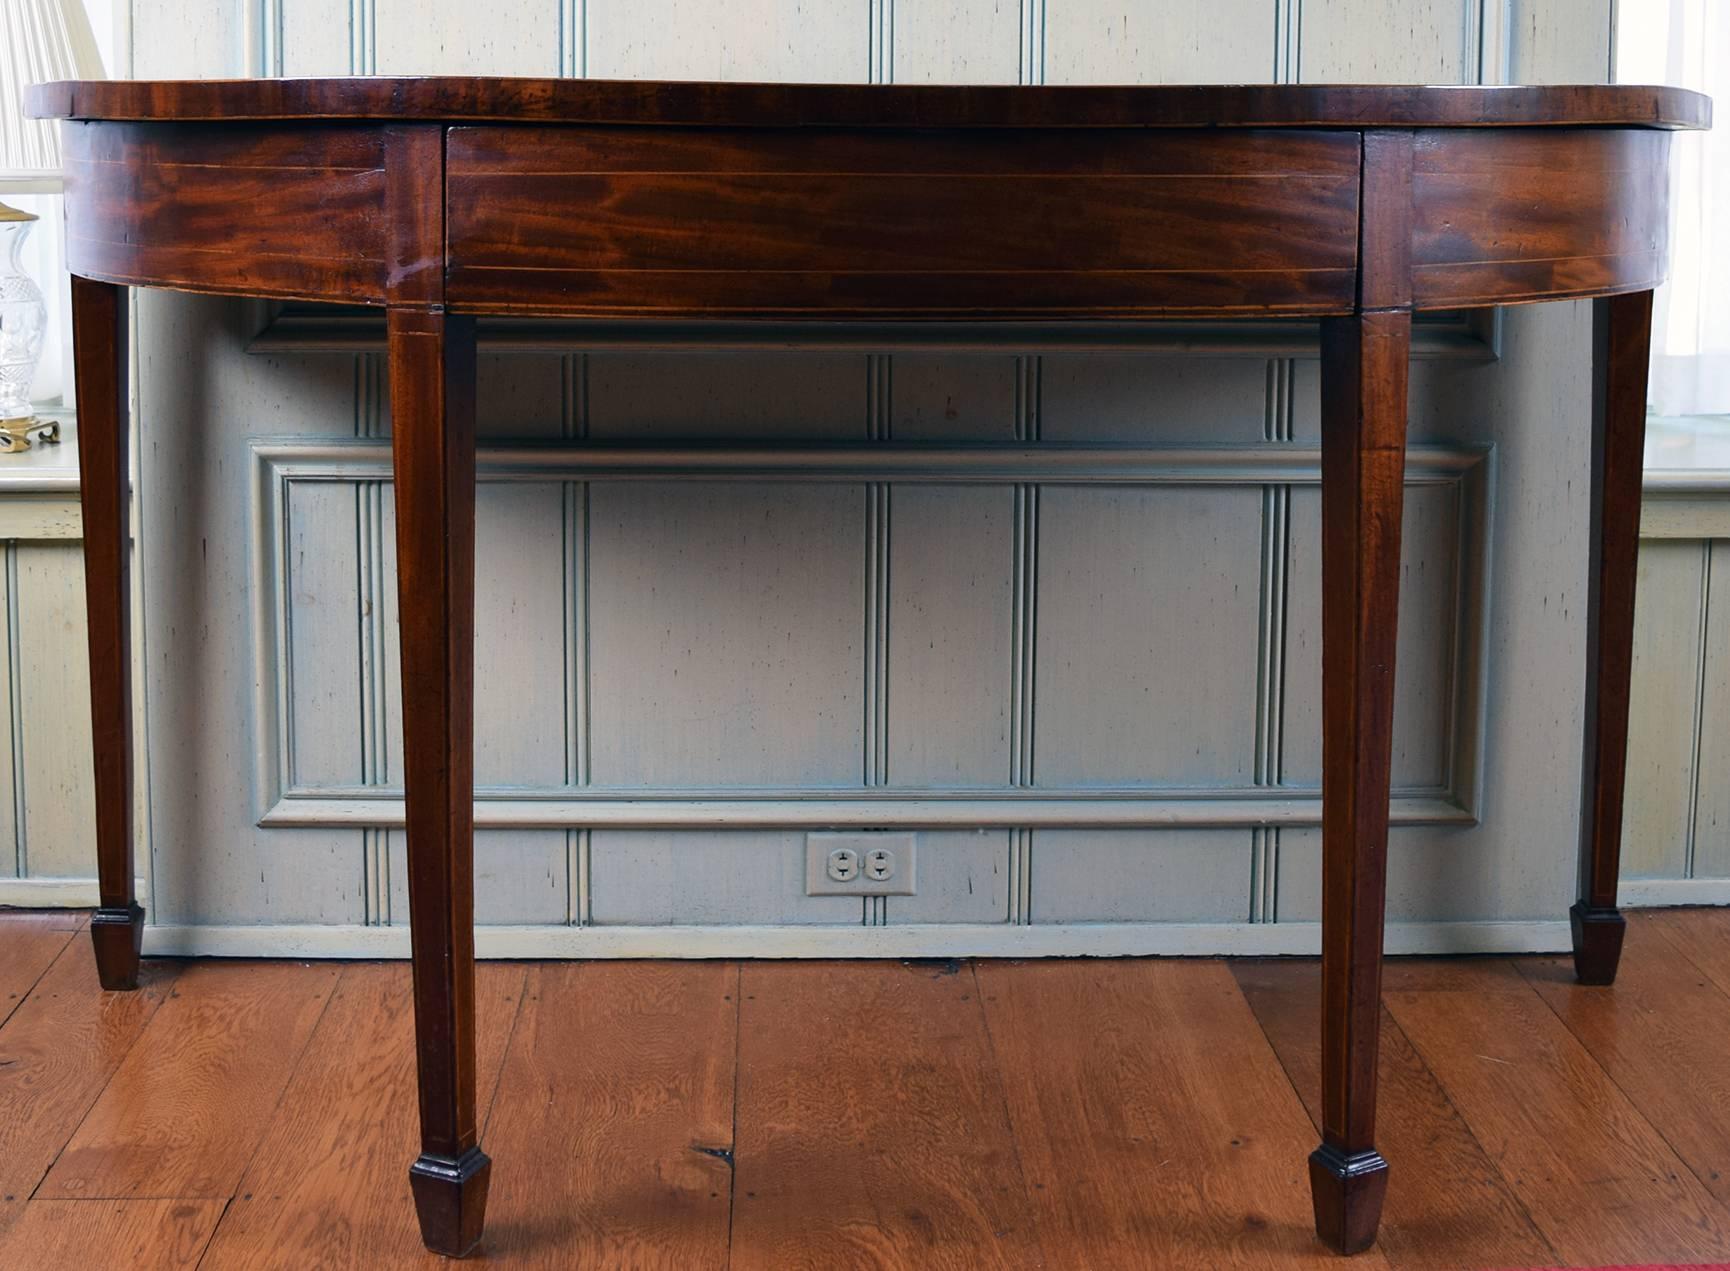 The D-shaped top with a conforming single frieze drawer line inlaid, raised on squared tapering legs, line inlaid, ending in spade feet

Provenance: Roundwood Manor, Hunting Valley, Ohio.